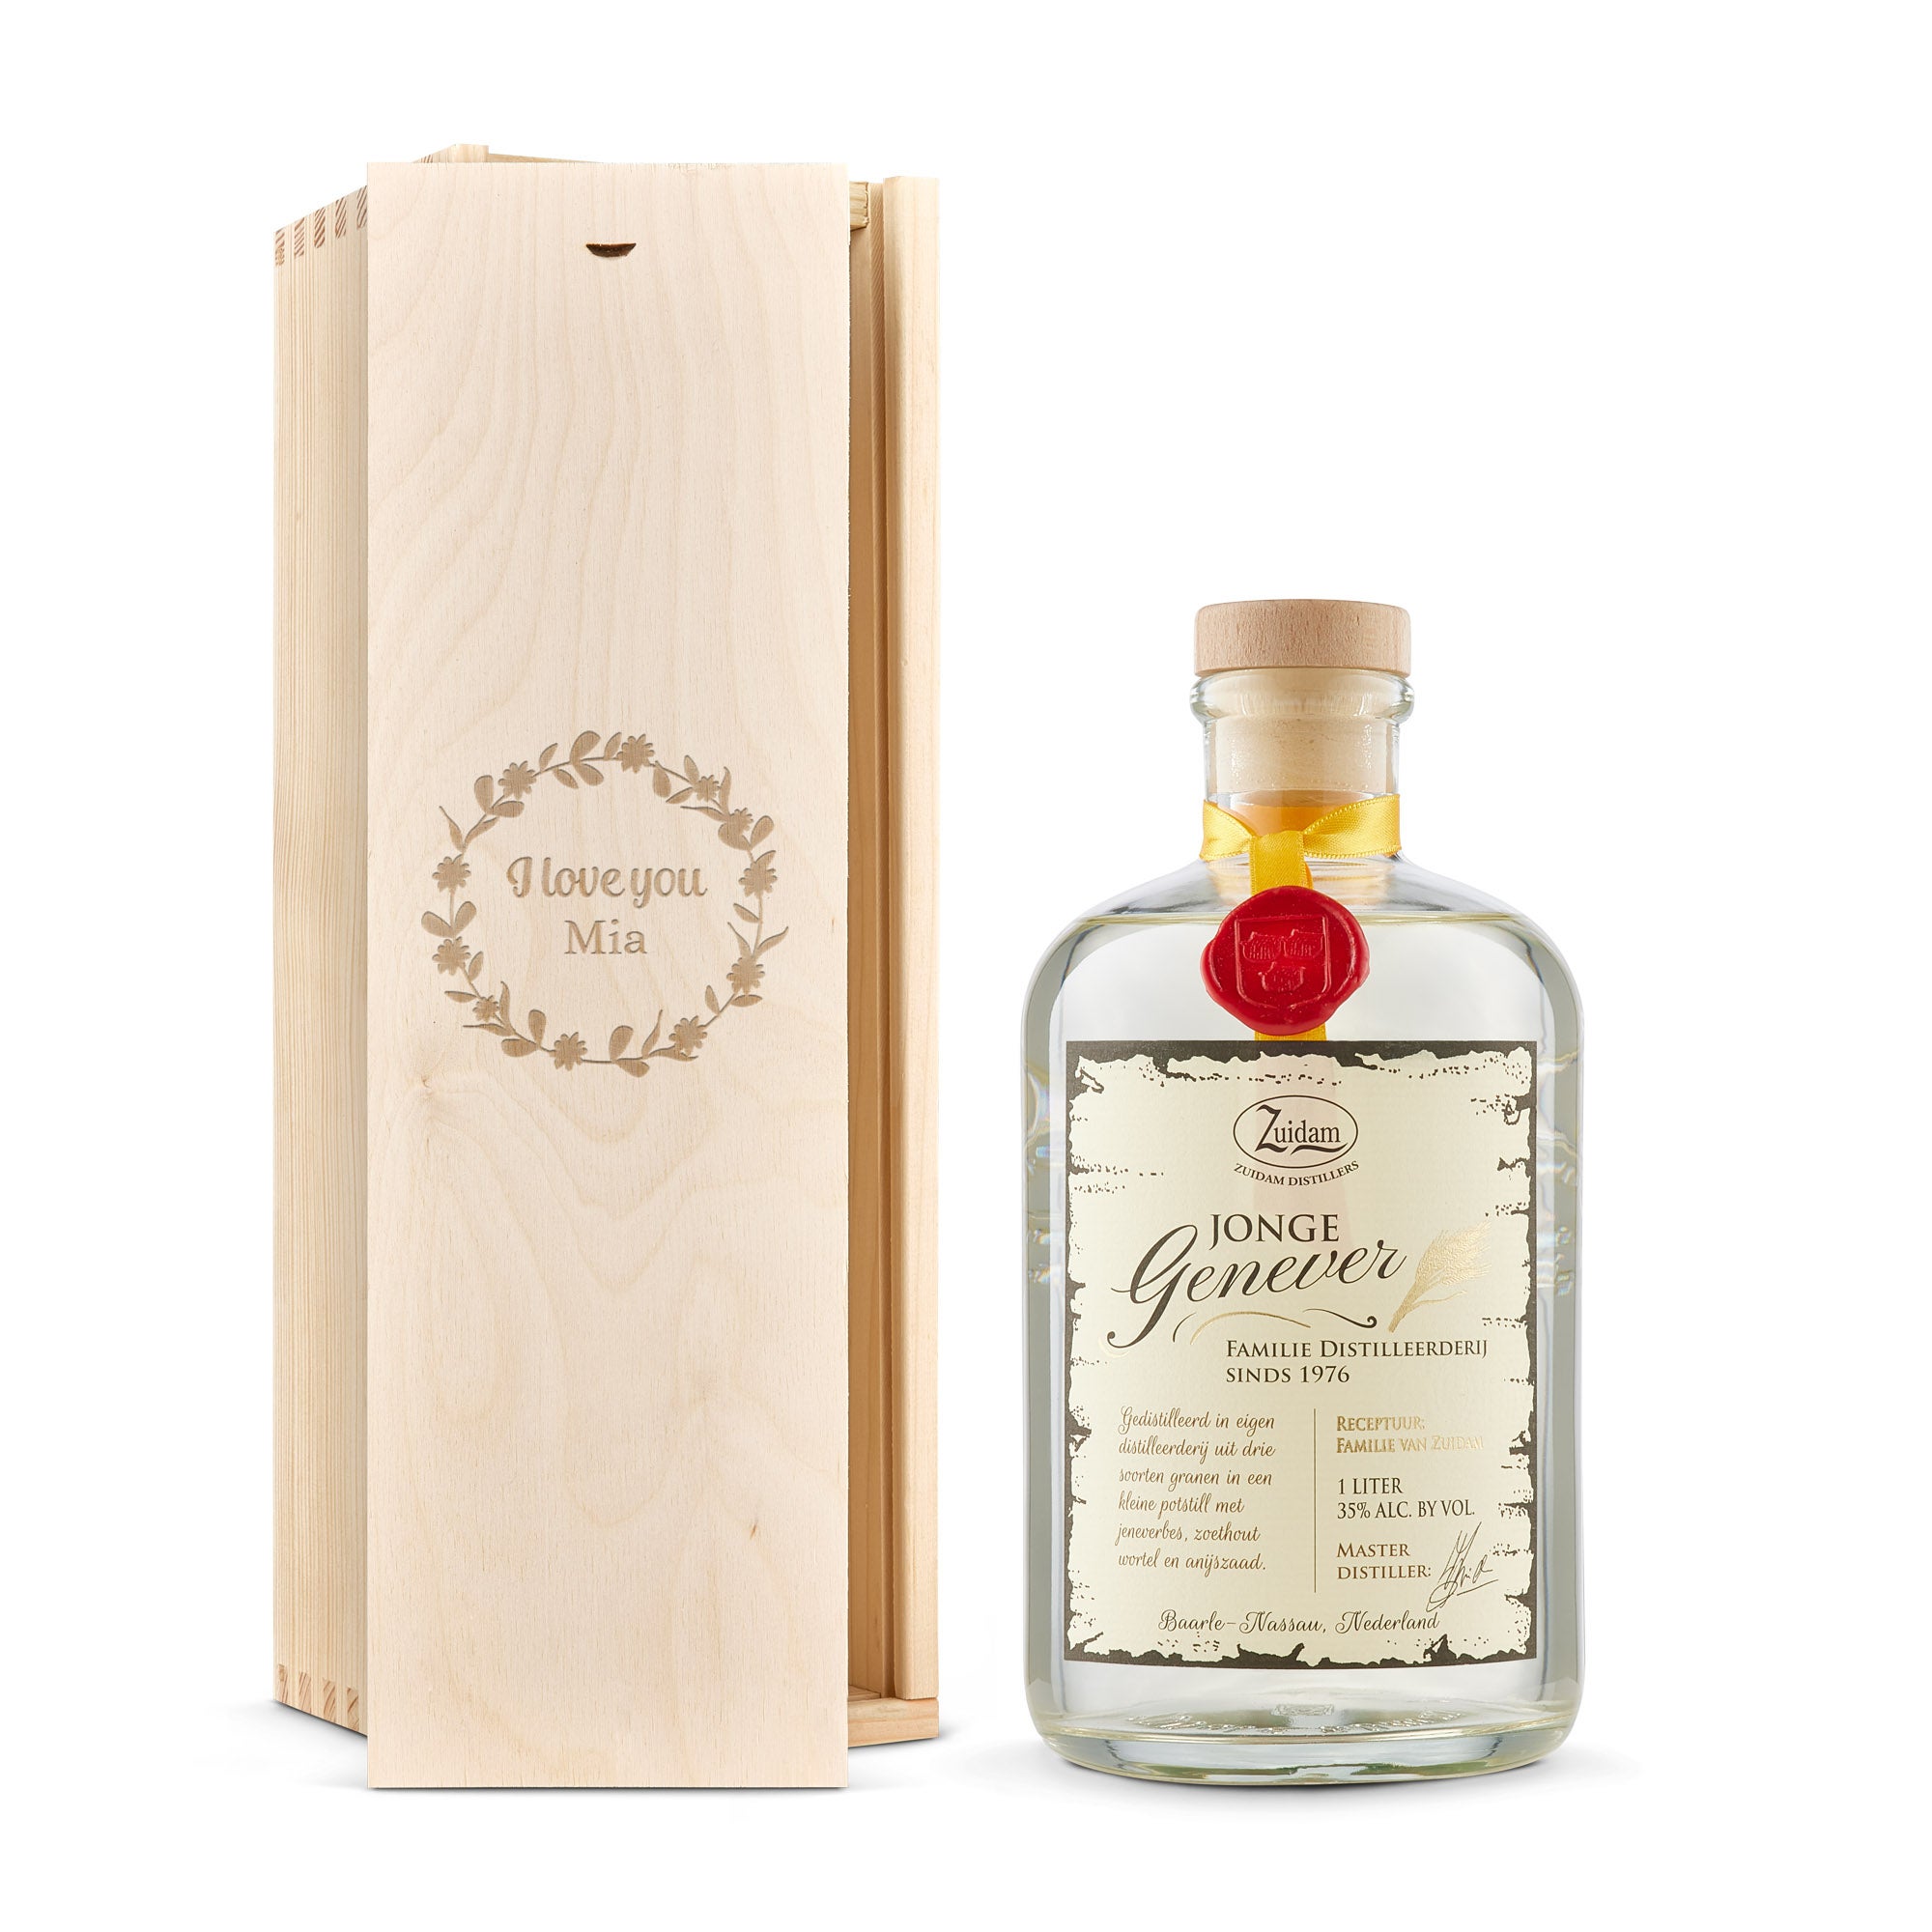 Personalised Dutch gin gift - Zuidam - Engraved wooden case